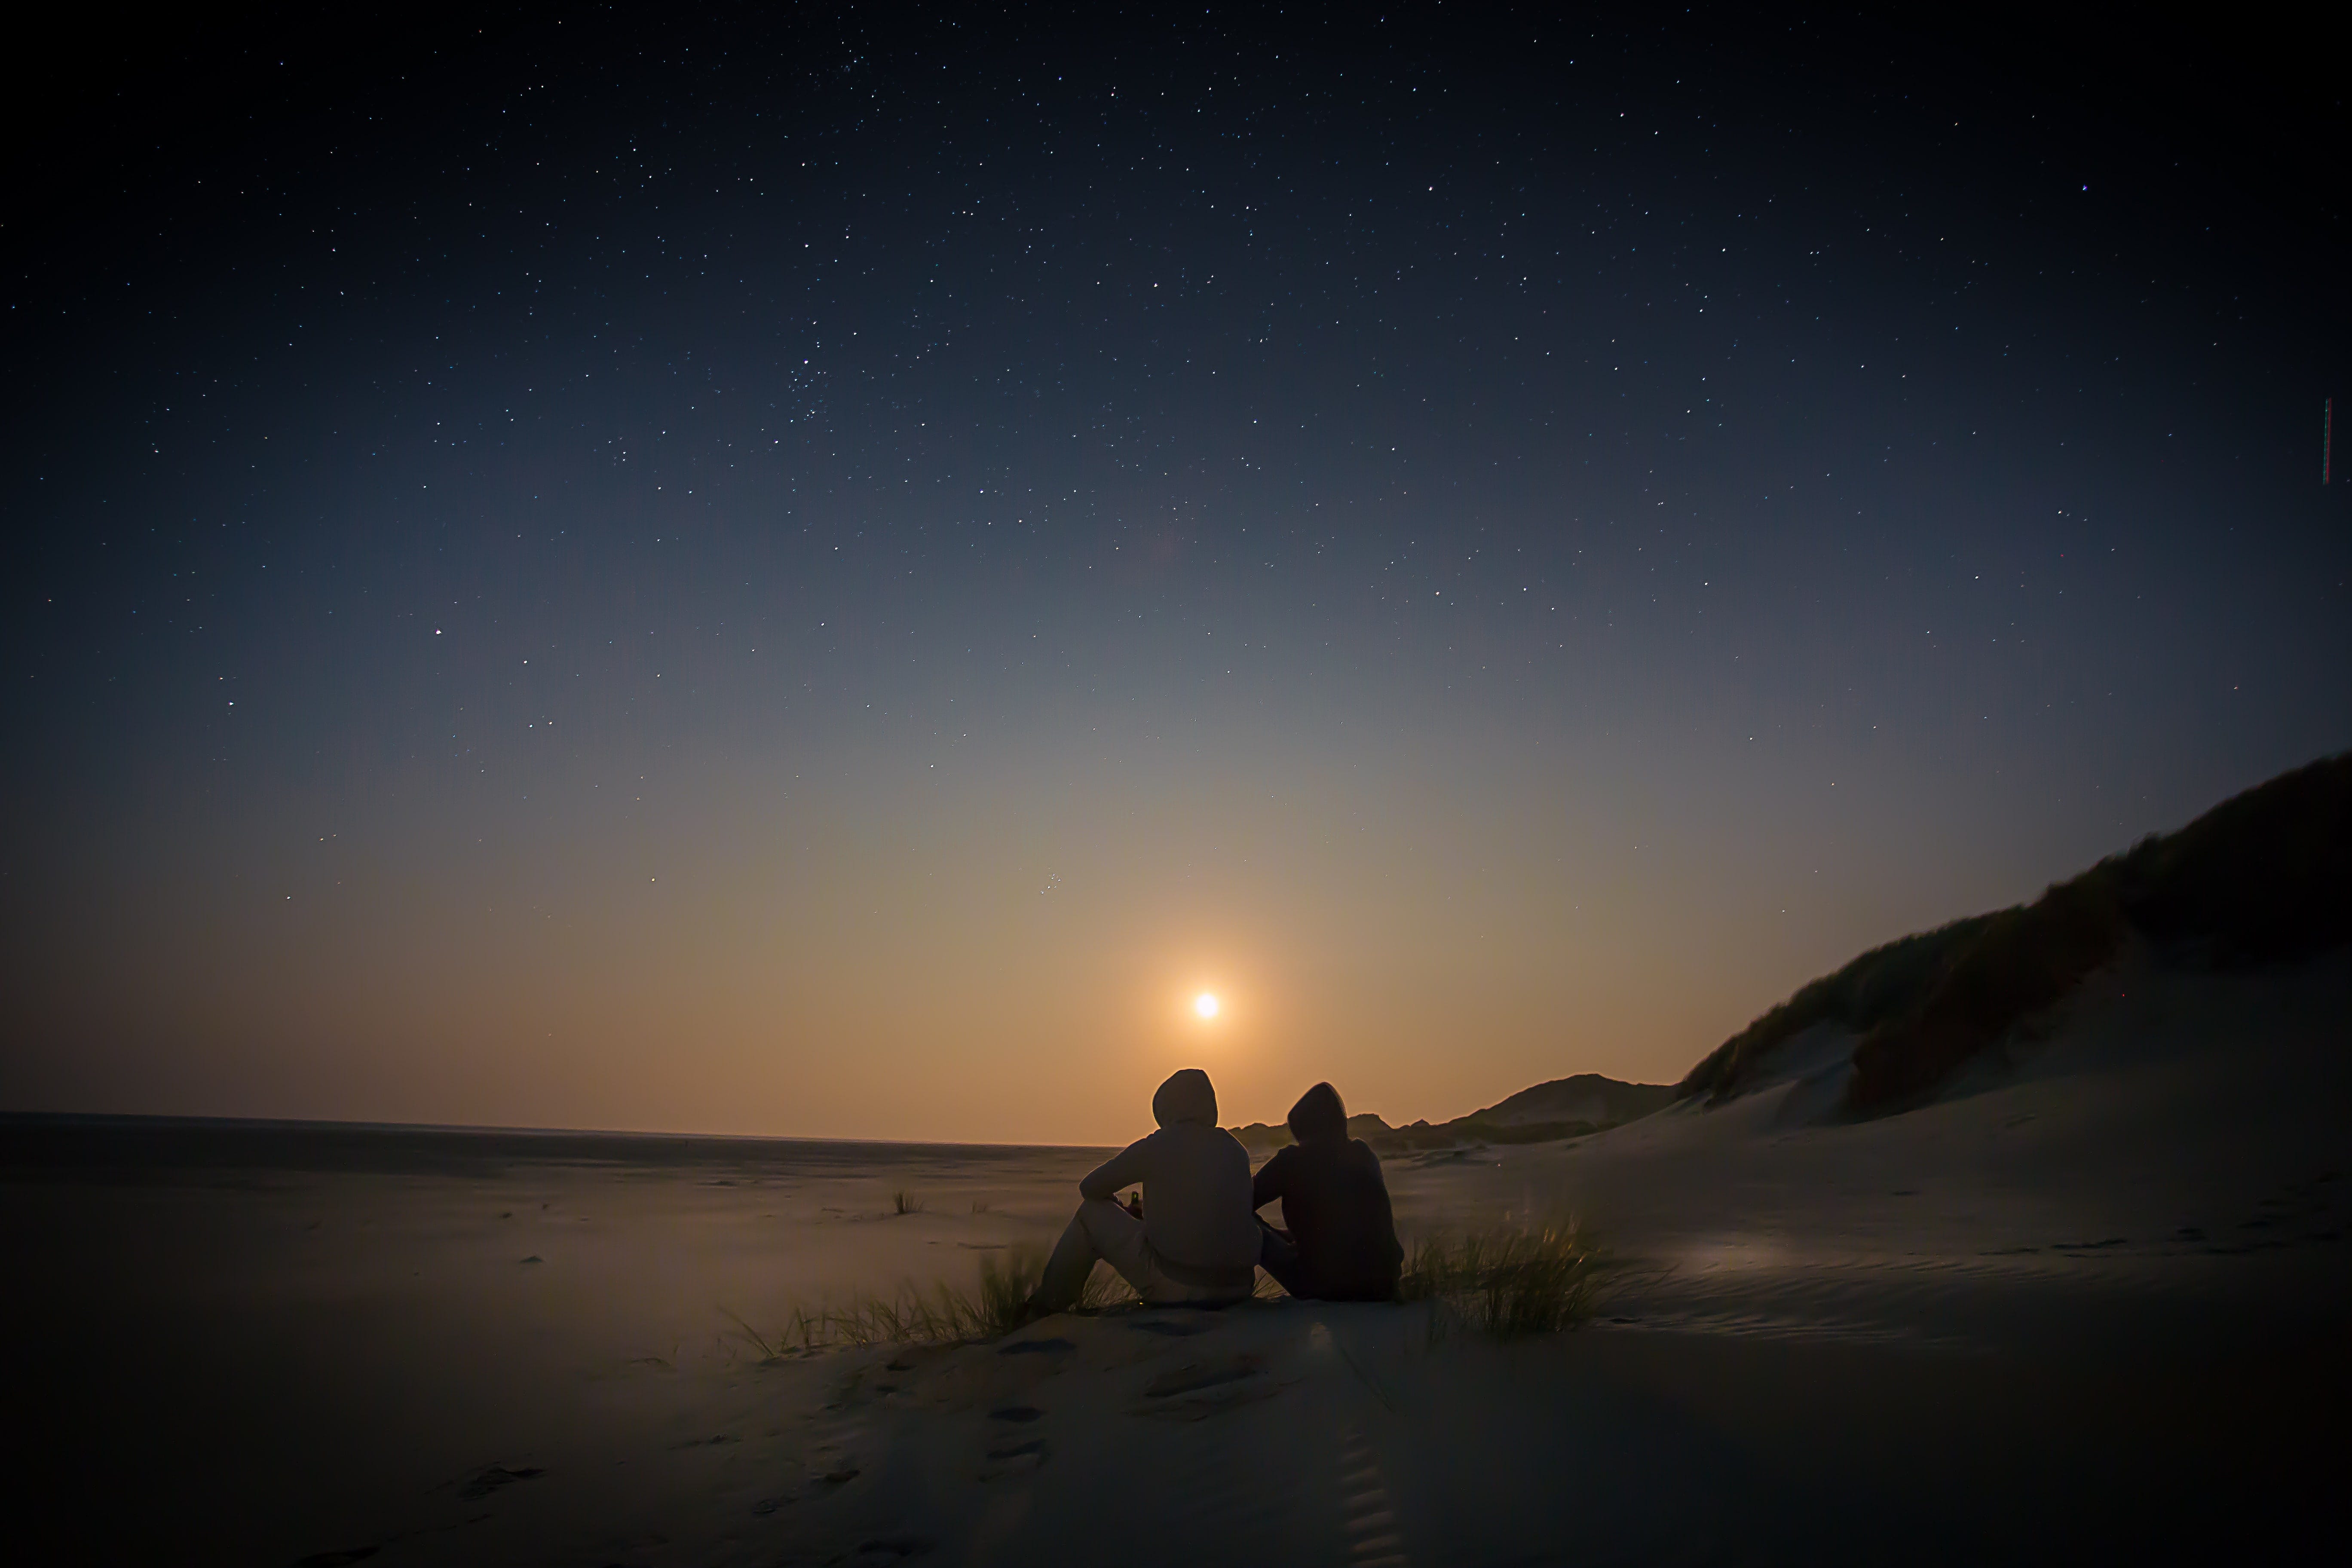 Two people sitting by the beach, either at dawn or sunset.